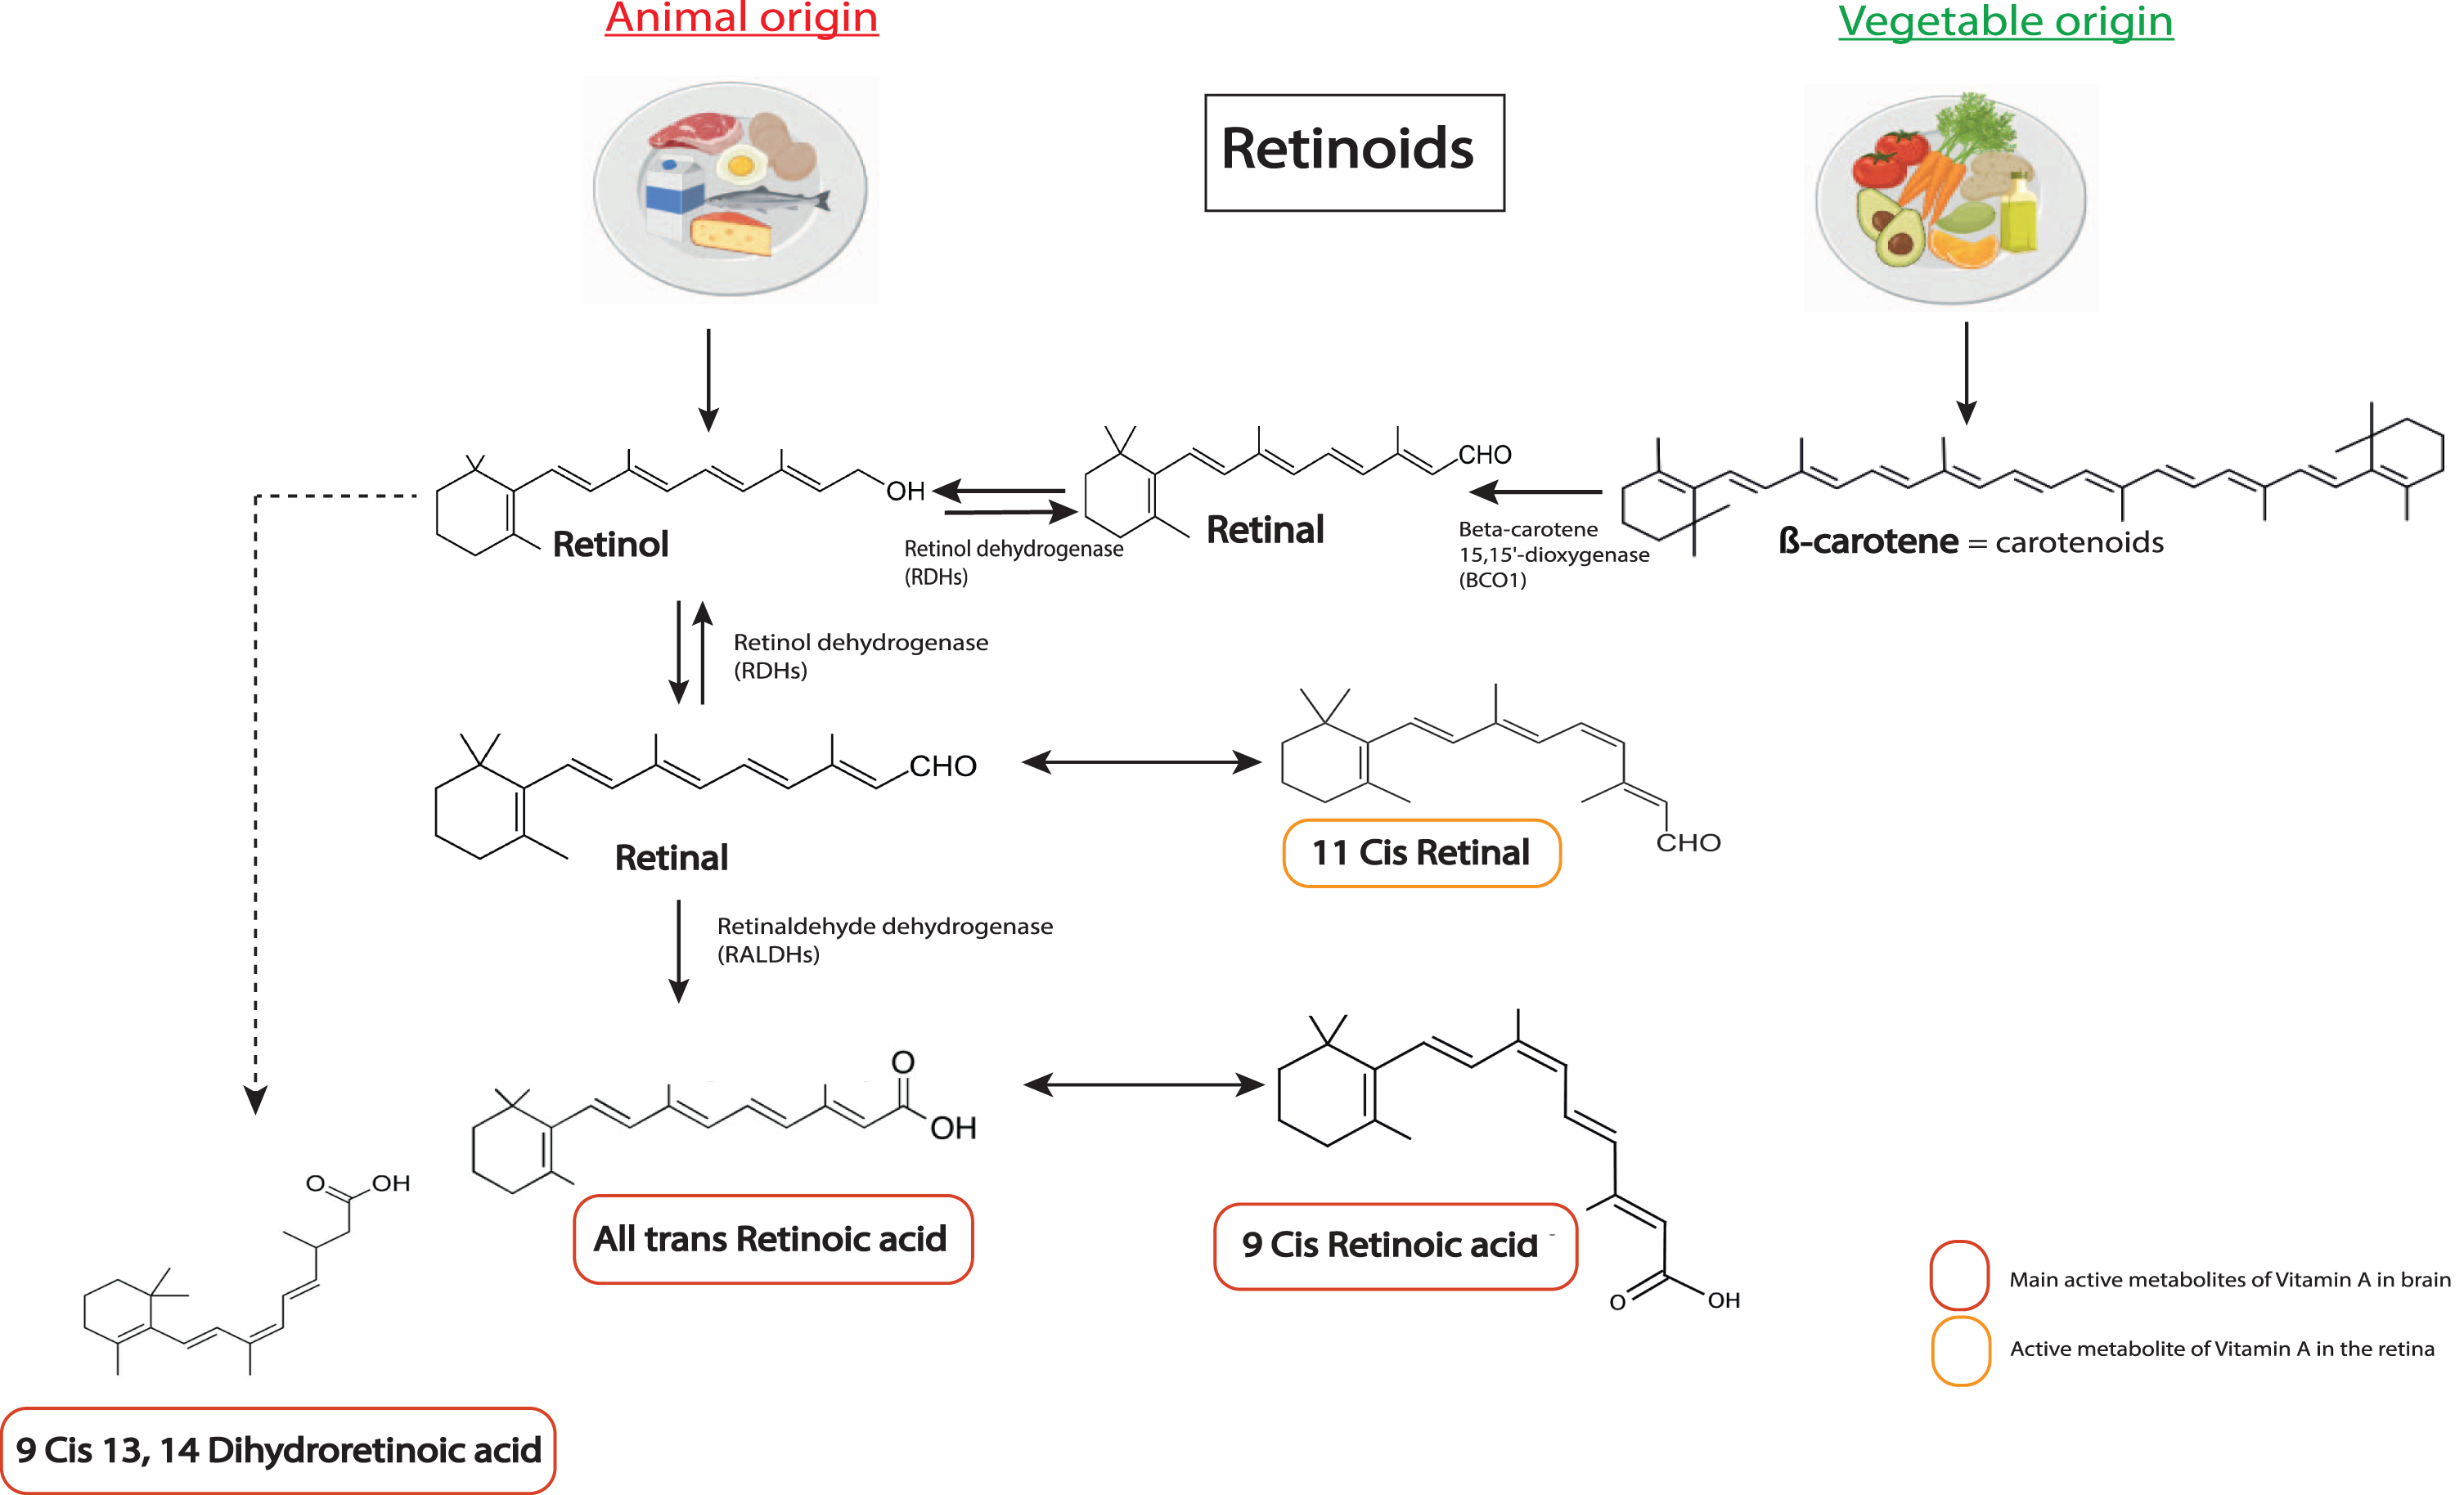 Chemical structures of the main retinoids metabolized in the body. Retinol (vitamin A) is directly provided by animal sources. Carotenoids, such as β-carotene, are precursors of retinol from vegetable sources that can be converted into retinol by the organism. Retinol is metabolized into retinal by enzymes of the RDHs family, which can also be converted back to retinol. Retinal can be metabolized into 11 cis retinal. A key bioactive metabolite produced from retinal is RA (all trans retinoic acid), which is irreversibly metabolized by a RALDH protein (ALDH1A1 belongs to RALDHs). RA can be metabolized in 11-Cis Retinal, which is an active metabolite in the retina, and in 9-cis RA, another key active metabolite for the brain. Alternatively, retinol can be transformed in 9CDHRA, an endogenous RXR ligand. RDHs, retinol dehydrogenases; RALDHs, retinaldehydes dehydrogenases.